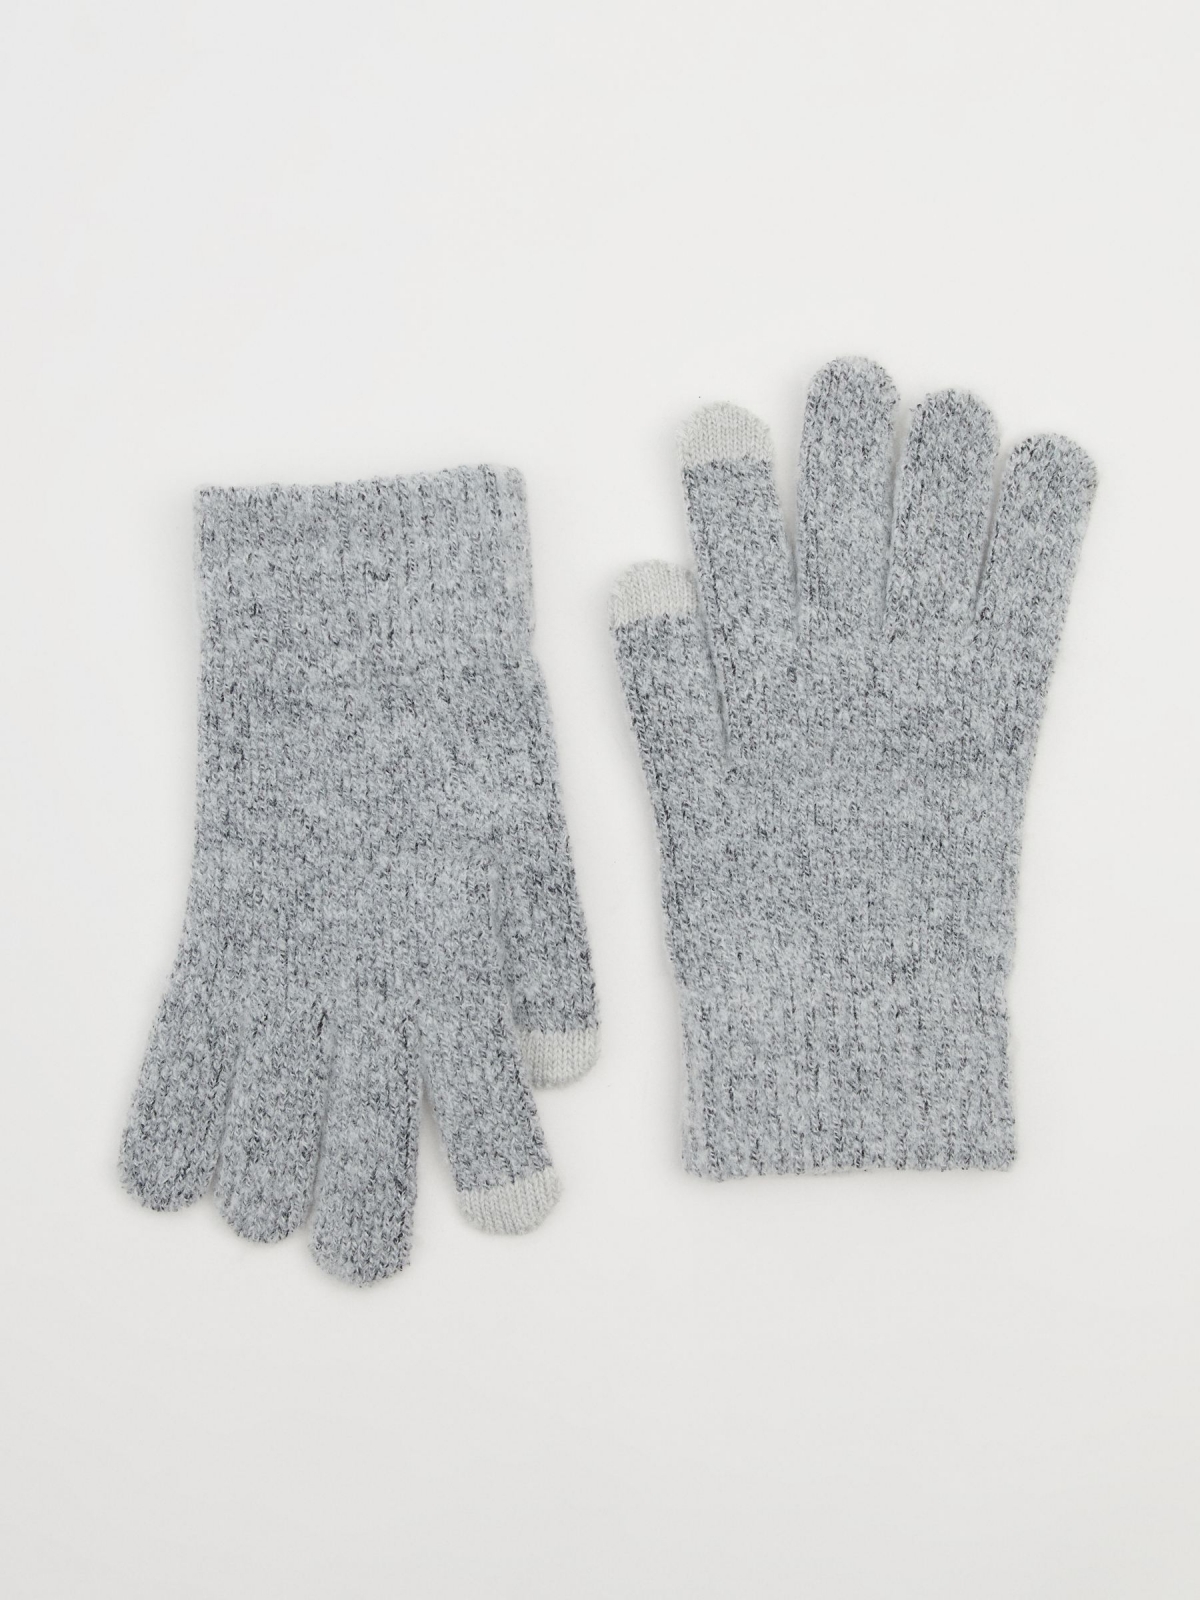 Marbled tactile glove grey